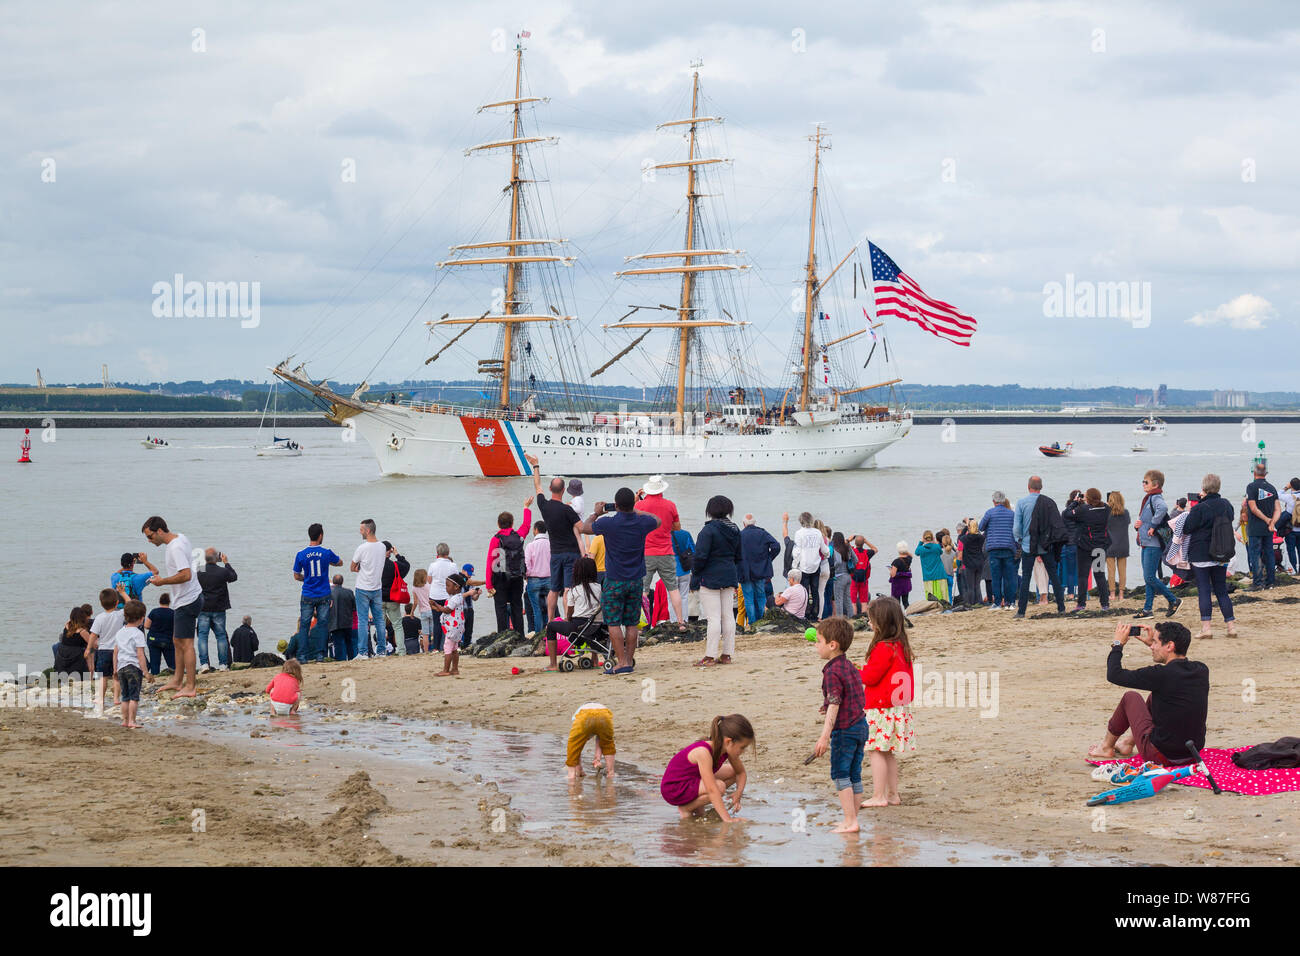 Spectators watch the tall ship US Coastguard USCGC Eagle (WIX-327), returning from the Rouen Armada from the beach at Honfleur, Normandy, France Stock Photo